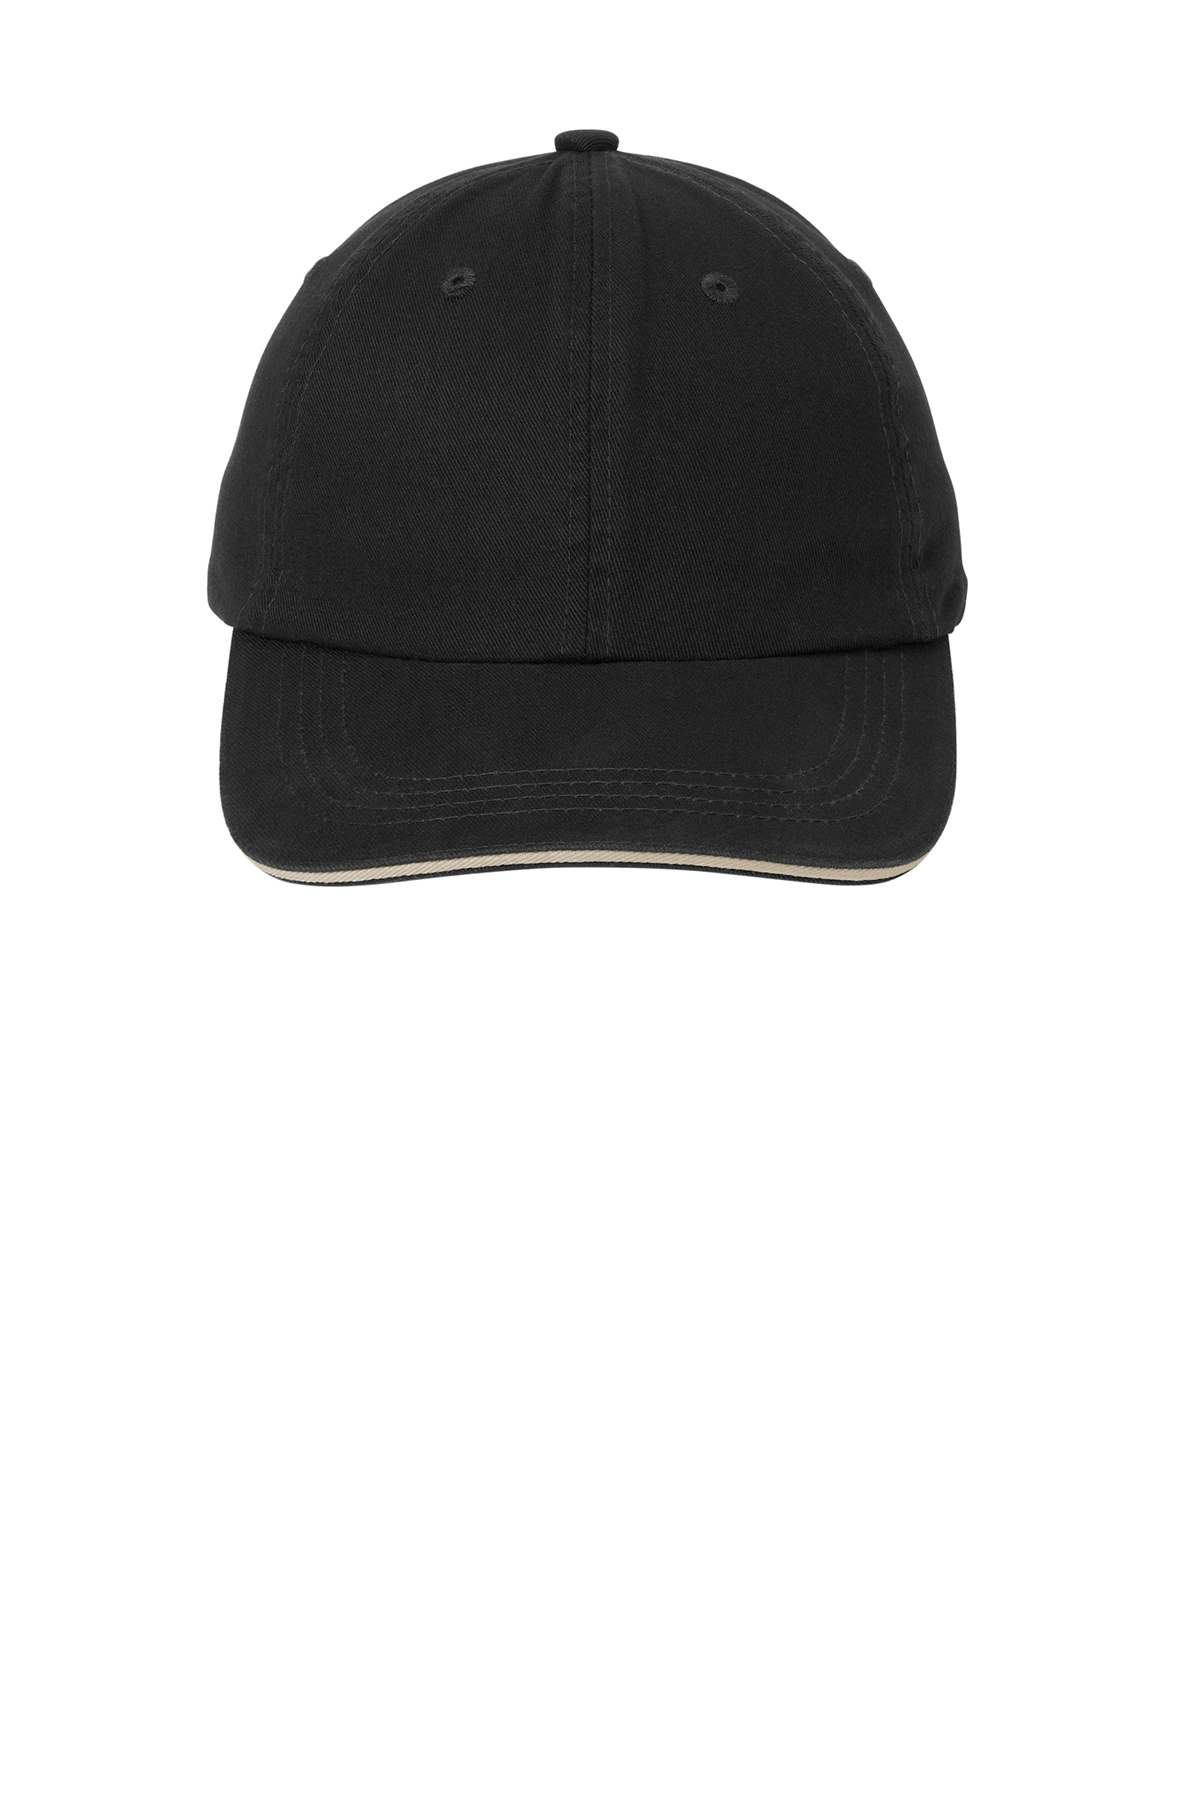 Port Authority Sandwich Bill Cap with Striped Closure | Product | Port ...